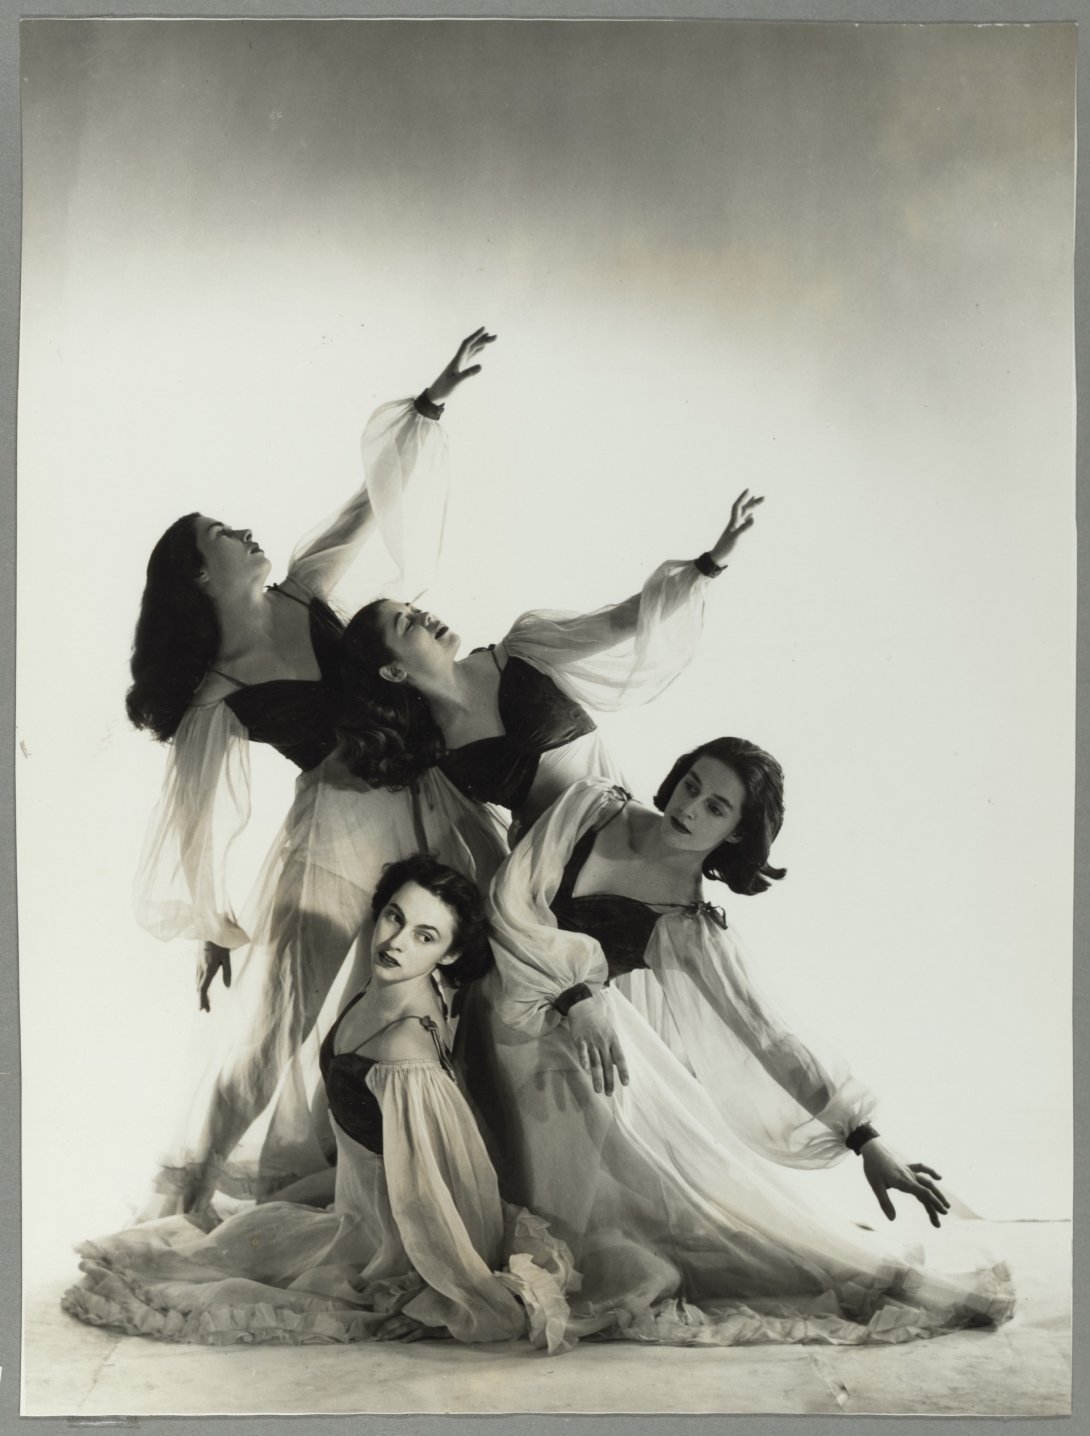 Four ballet dancers posing with their arms out and leaning in various directions